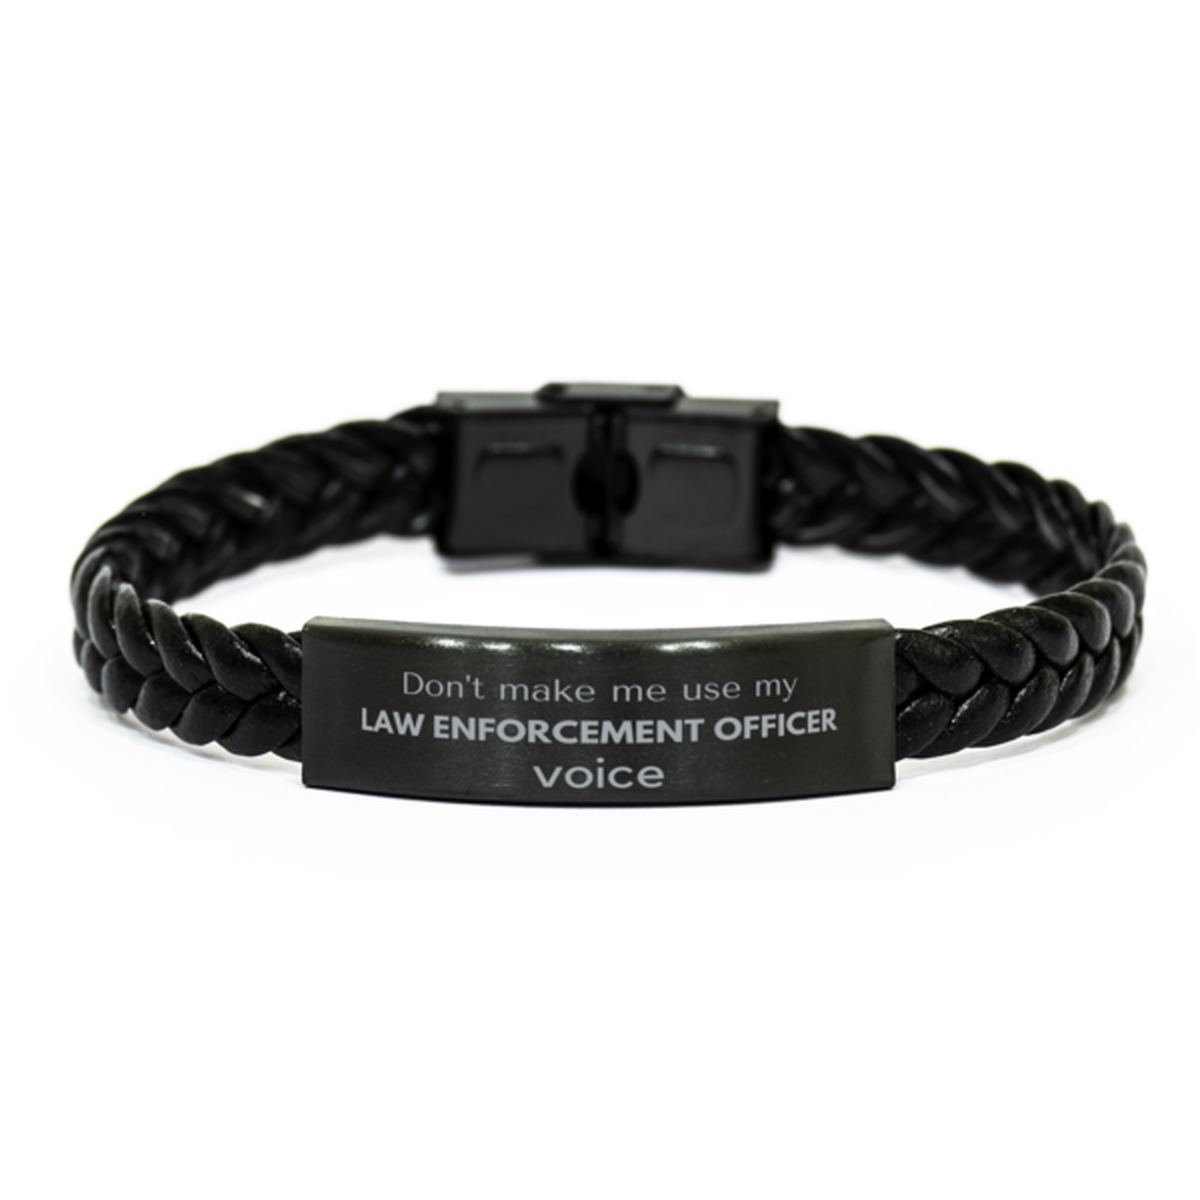 Don't make me use my Law Enforcement Officer voice, Sarcasm Law Enforcement Officer Gifts, Christmas Law Enforcement Officer Braided Leather Bracelet Birthday Unique Gifts For Law Enforcement Officer Coworkers, Men, Women, Colleague, Friends